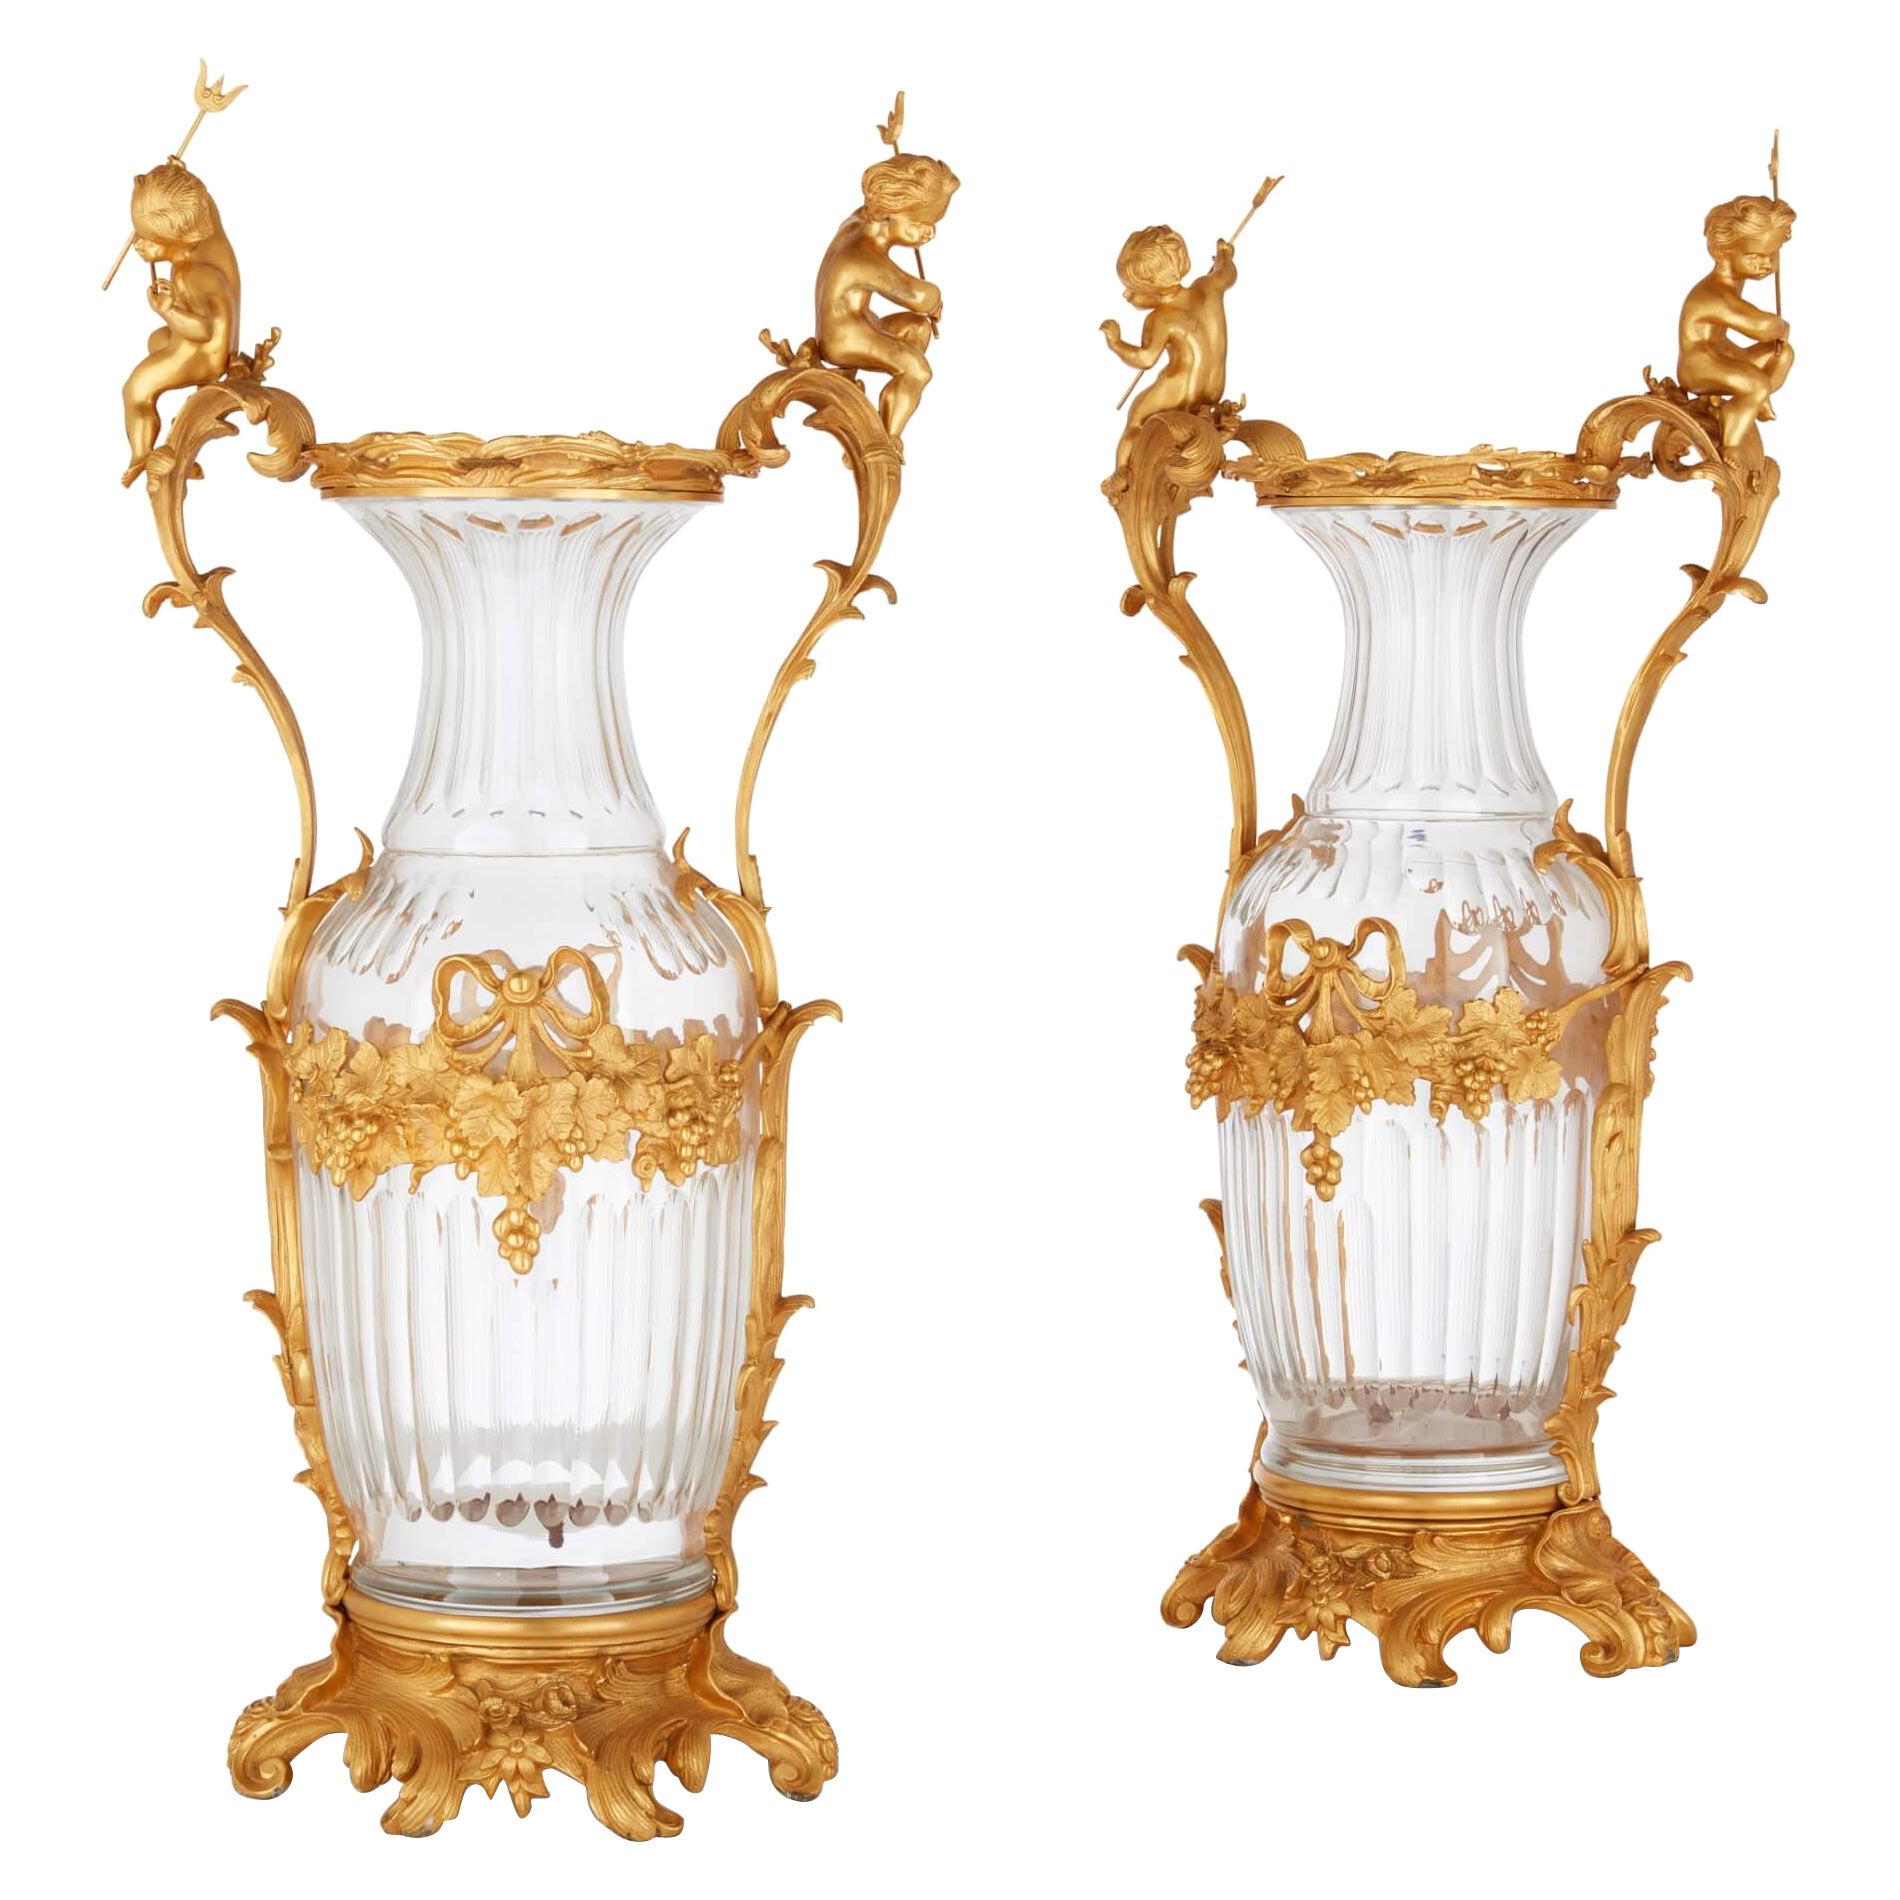 Large Pair of French Rococo Style Ormolu-Mounted Cut Glass Vases 